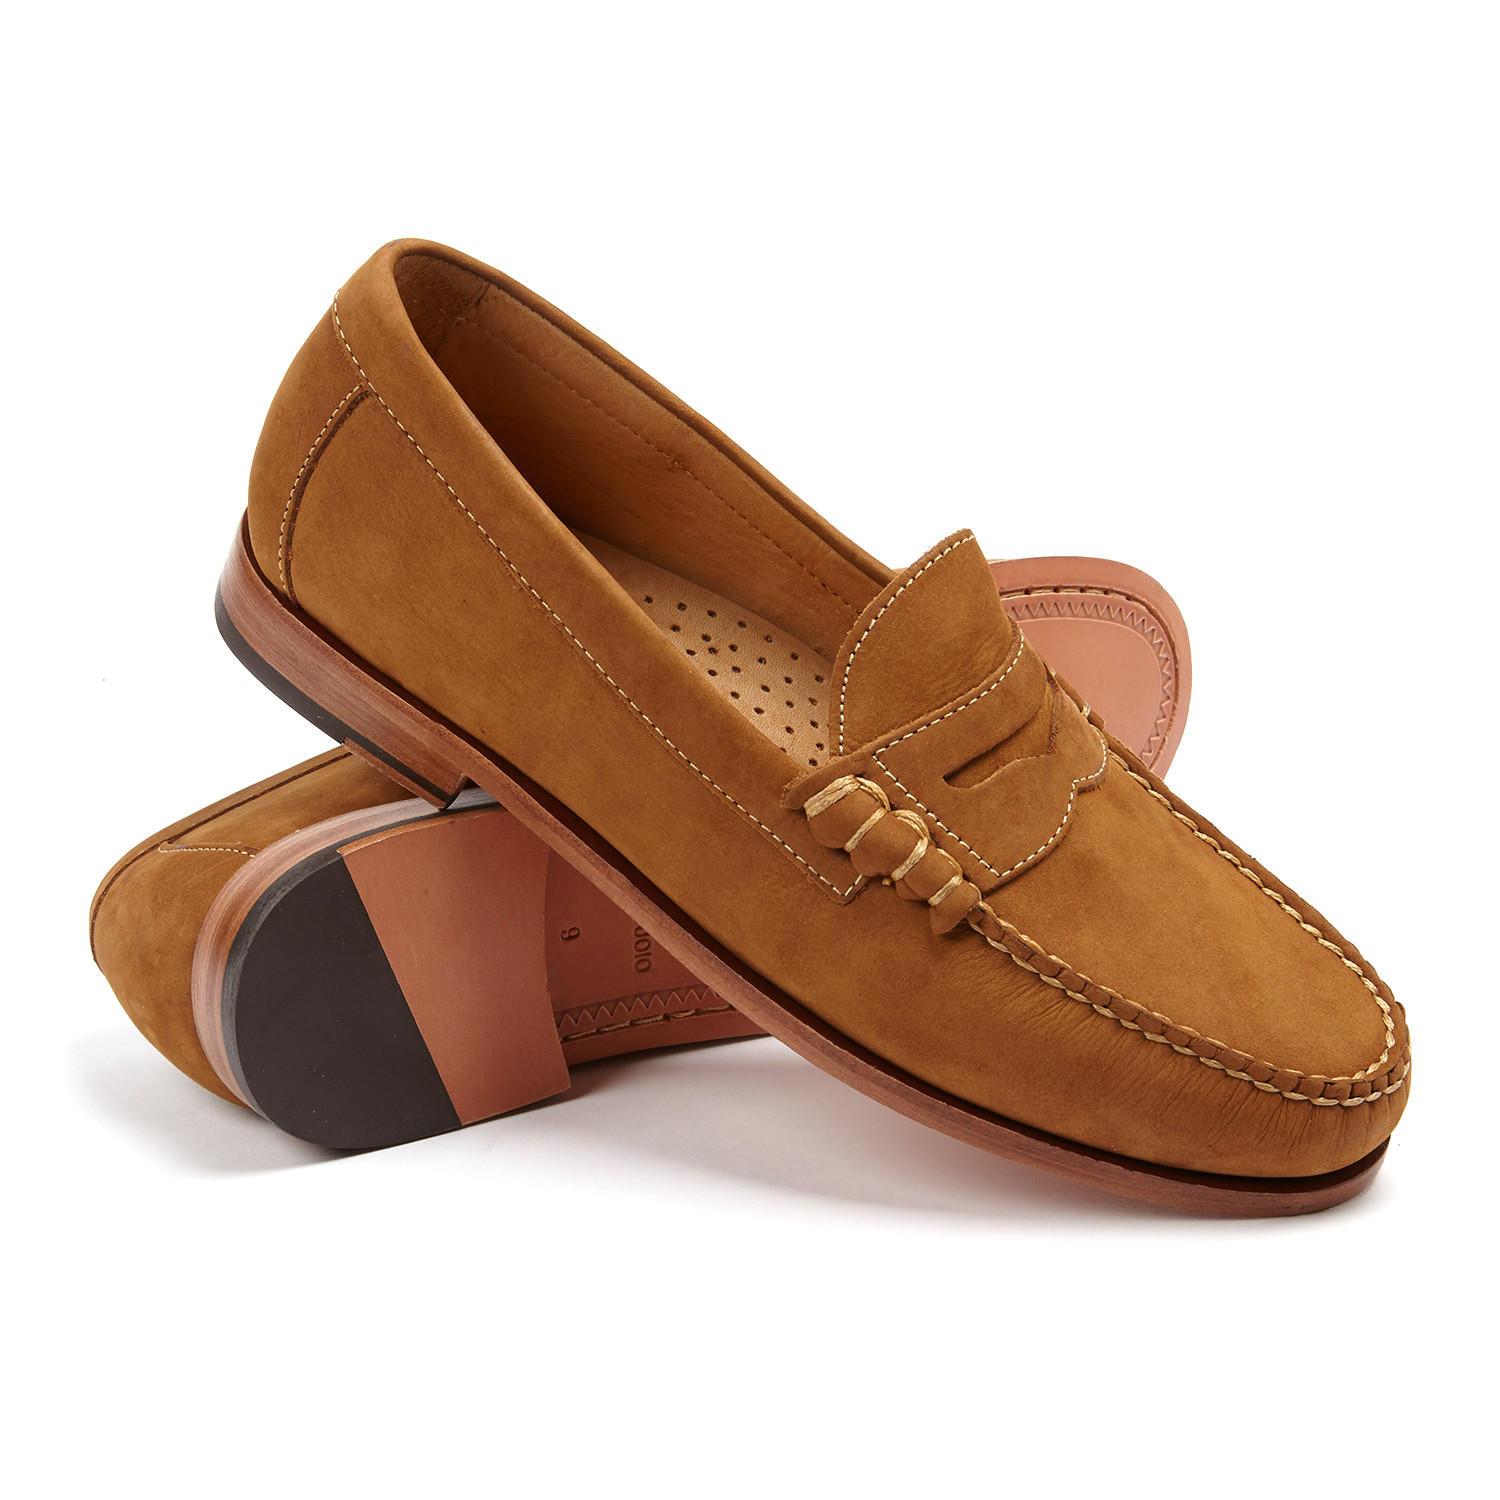 warfield and grand loafers